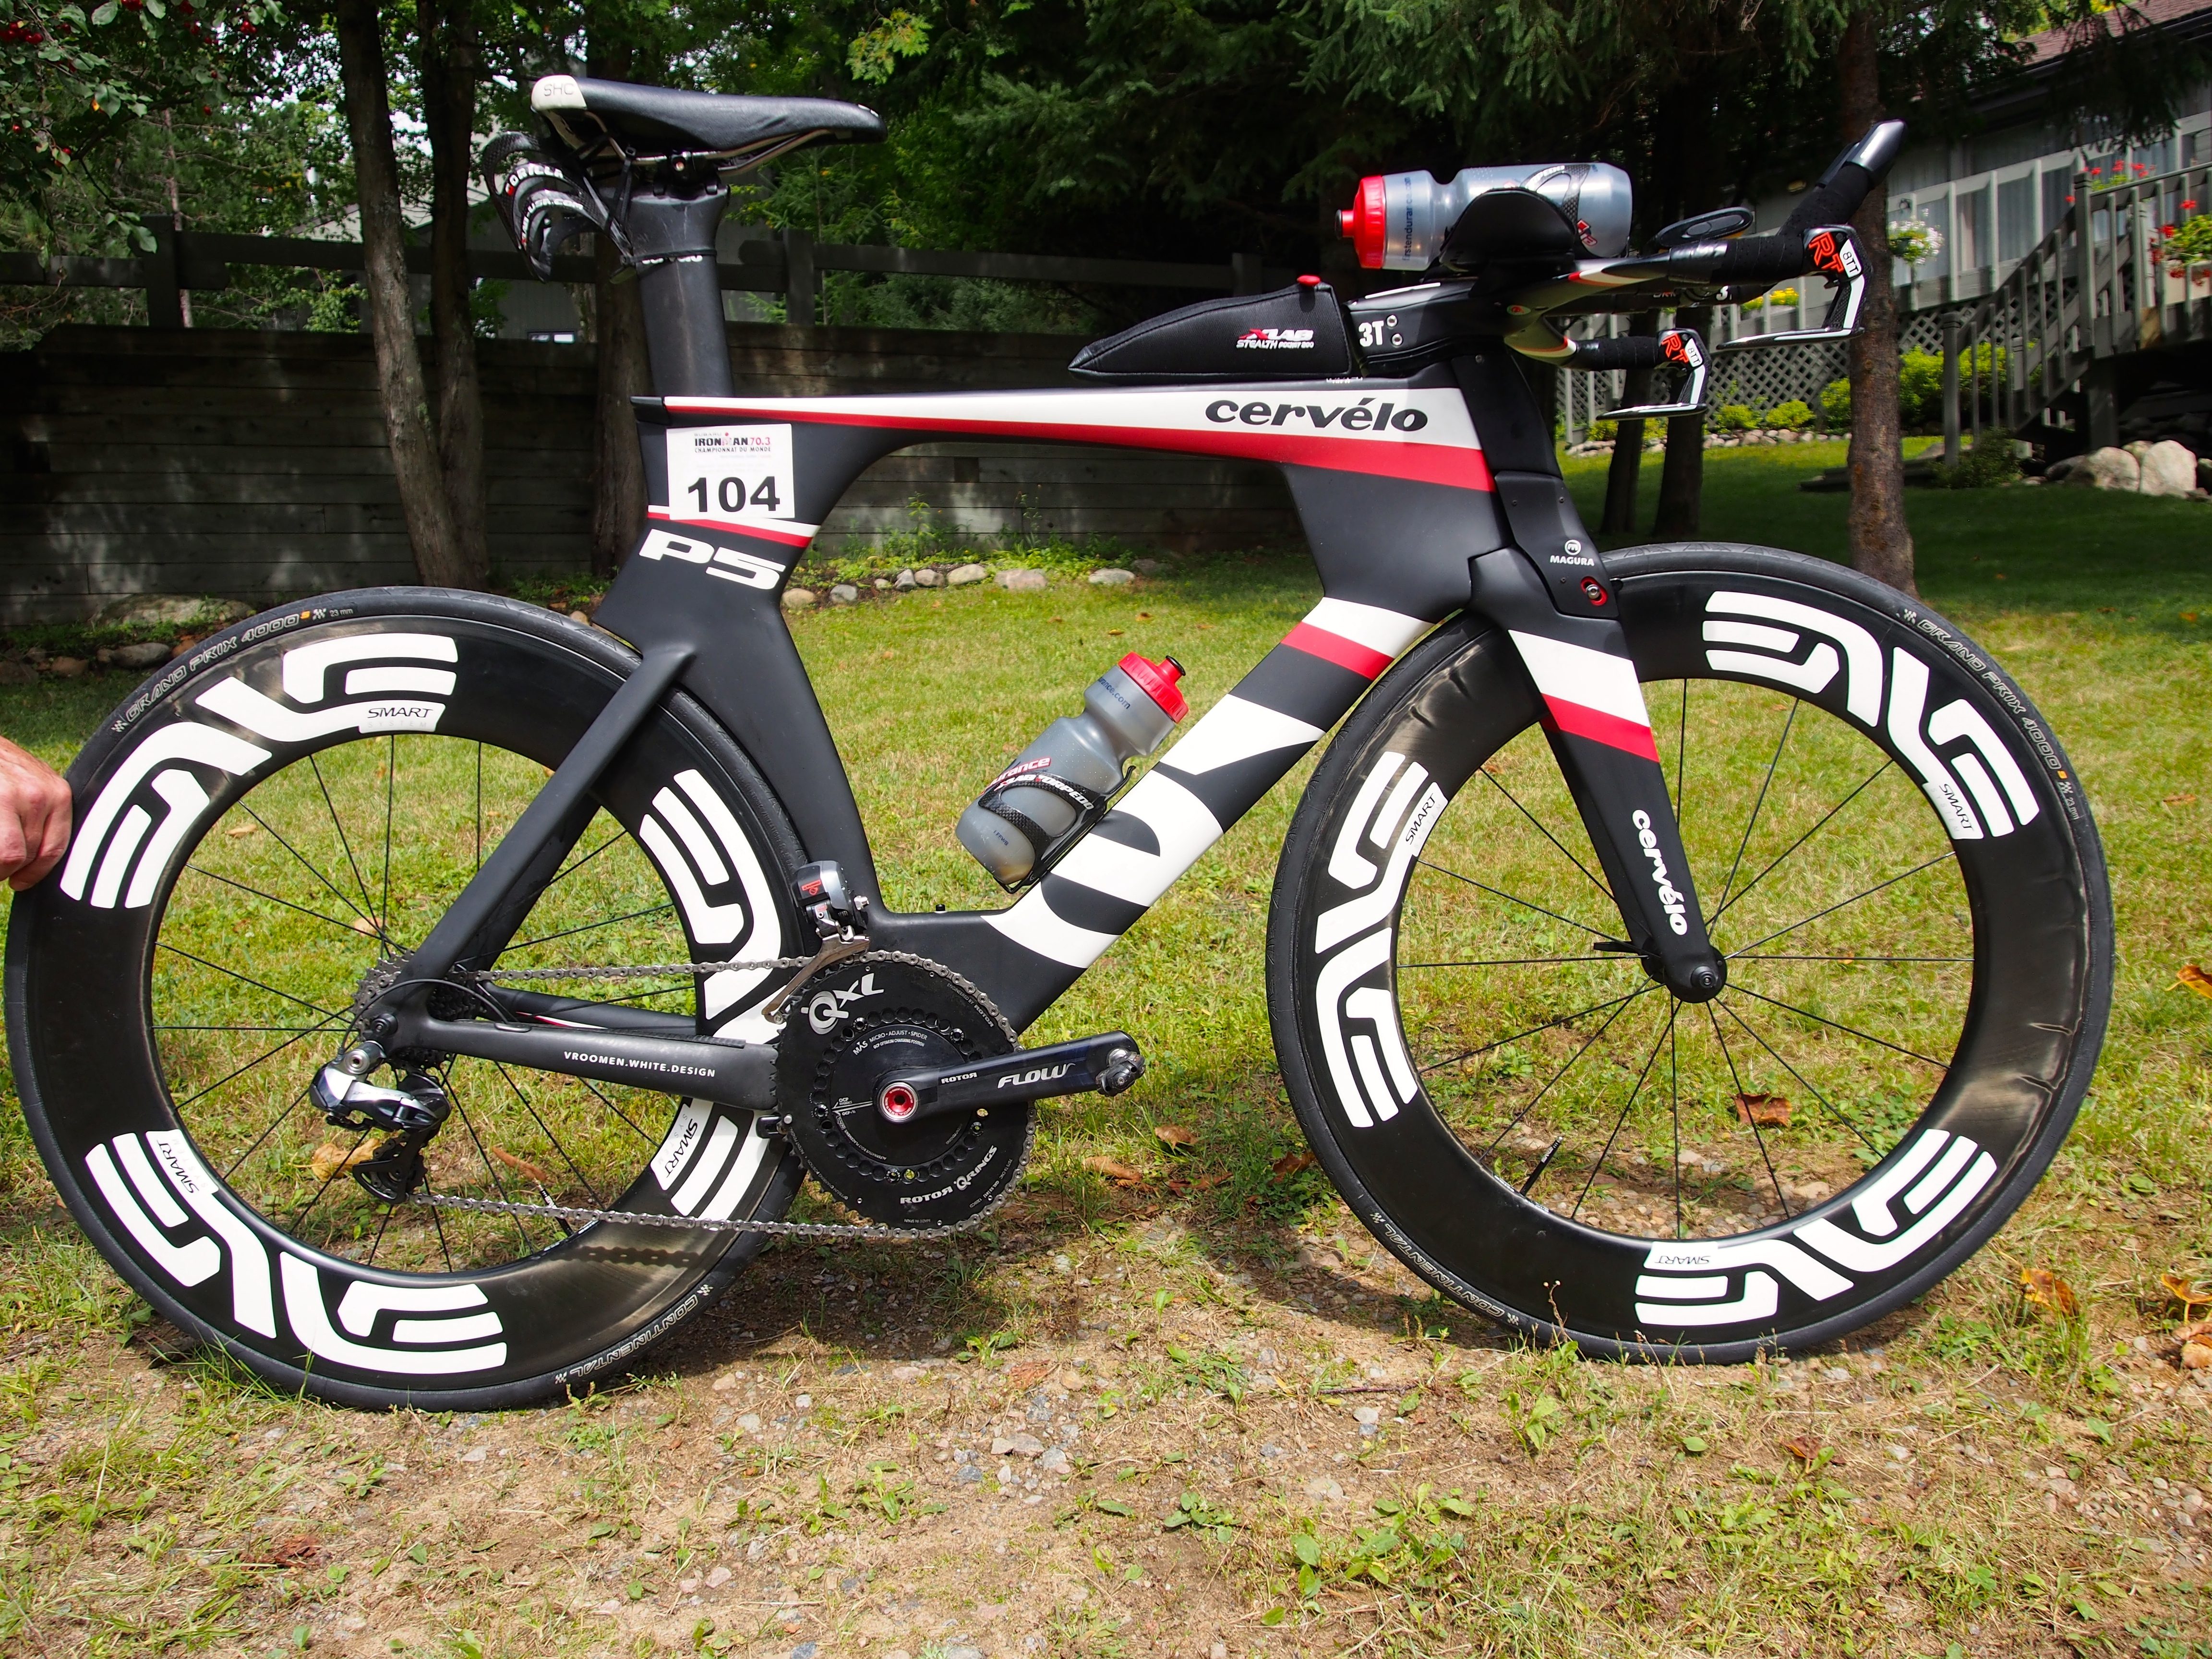 Heather Wurtele Cervelo P5 in race trim at the Ironman 70.3 World Championship at Mont Tremblant.